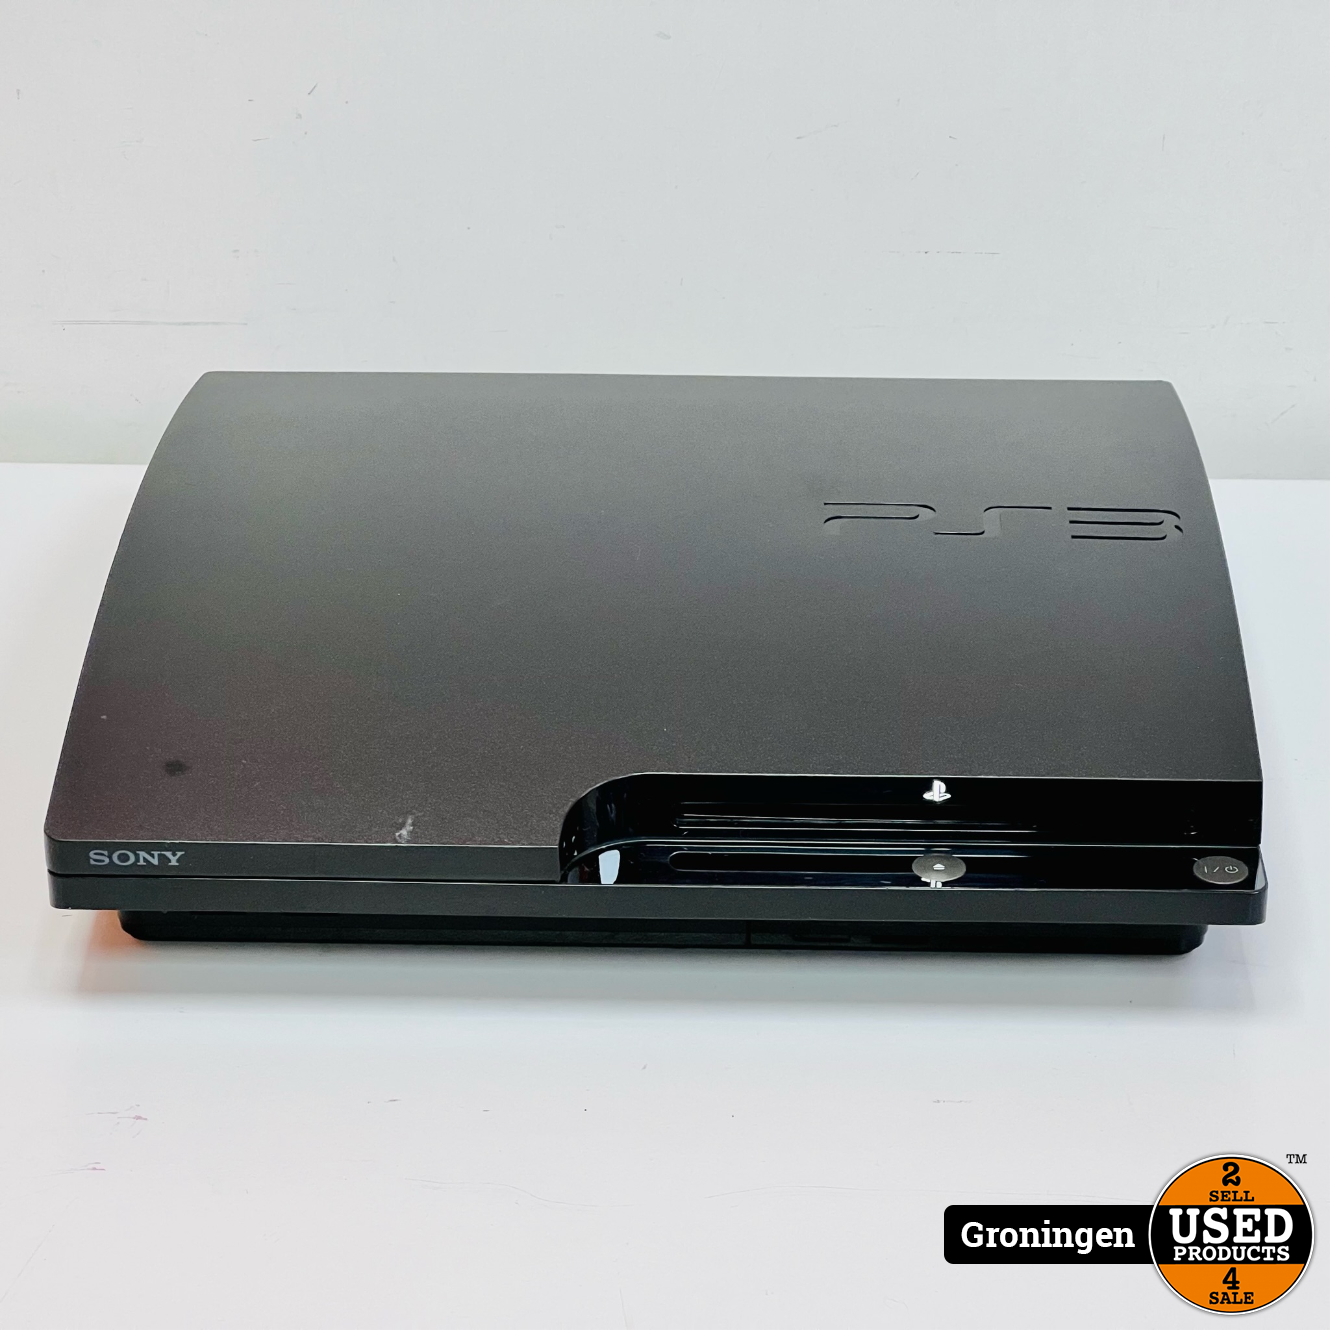 Anesthesie bord strip PS3] Sony Playstation 3 Slim 320GB Zwart | excl. controller - Used Products  Groningen